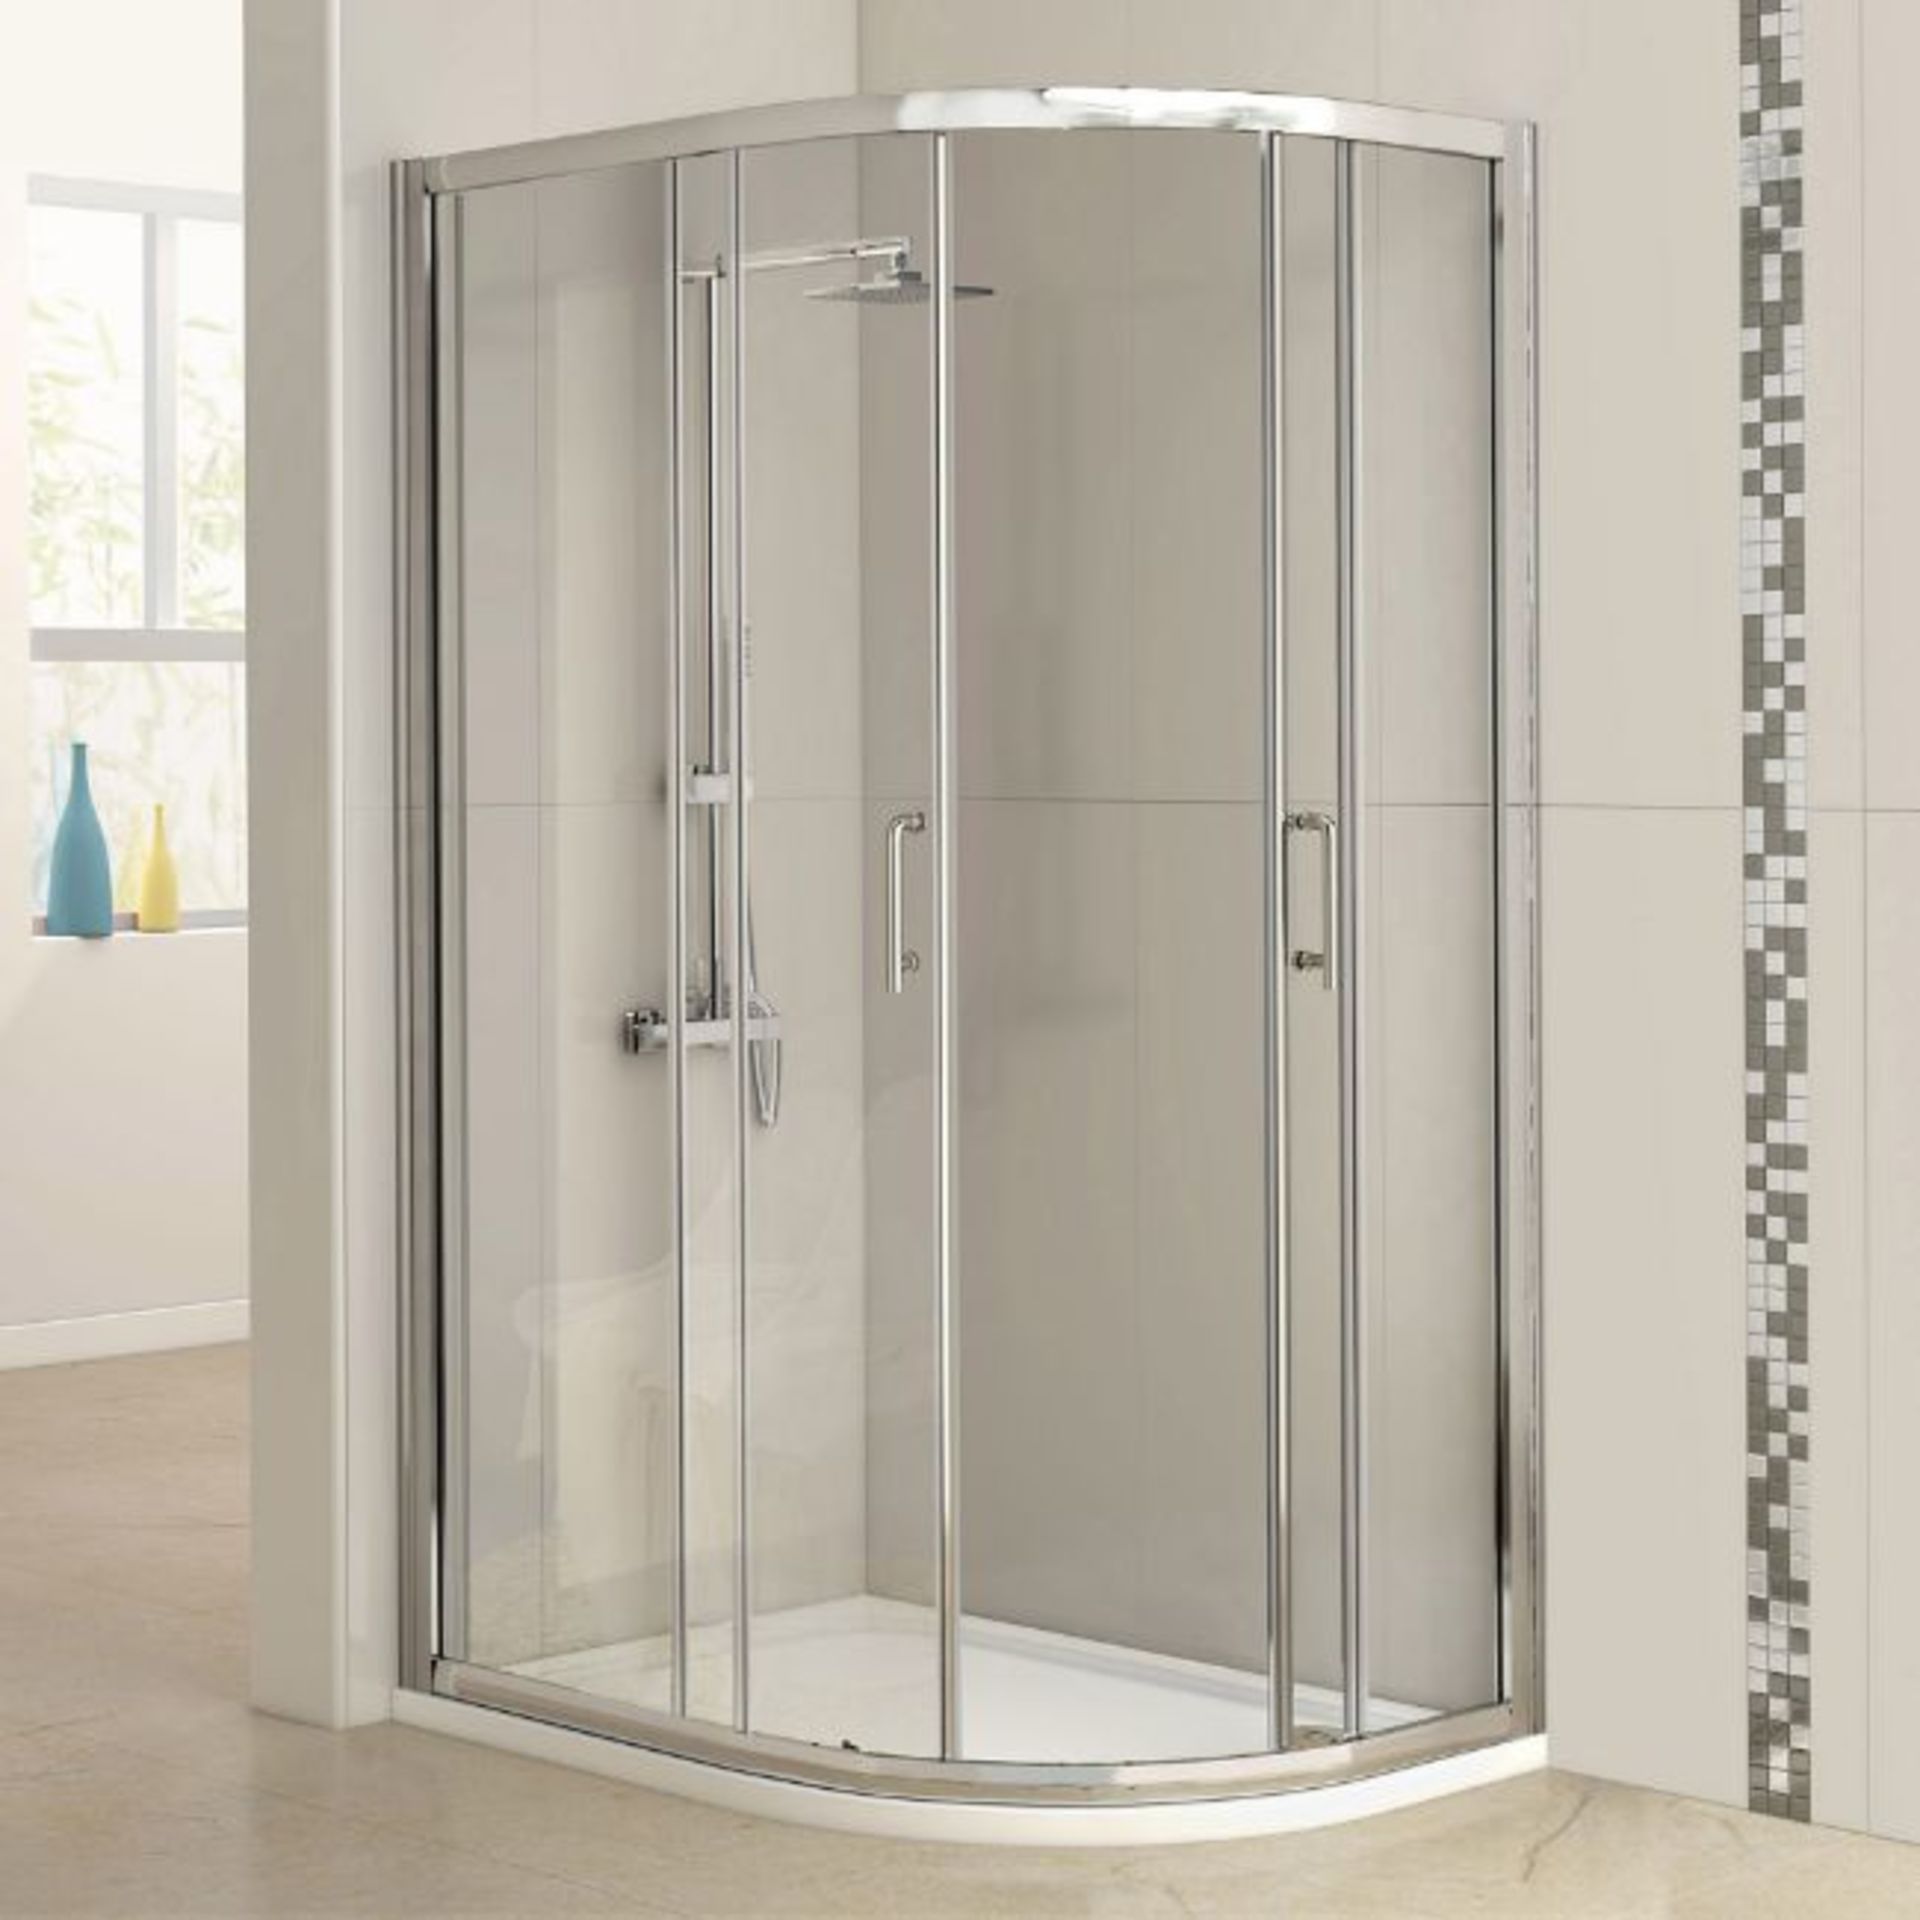 Twyfords 1200x900mm - 6mm - Offset Quadrant Shower Enclosure. RRP £599.99.Make the most of th... - Image 3 of 3